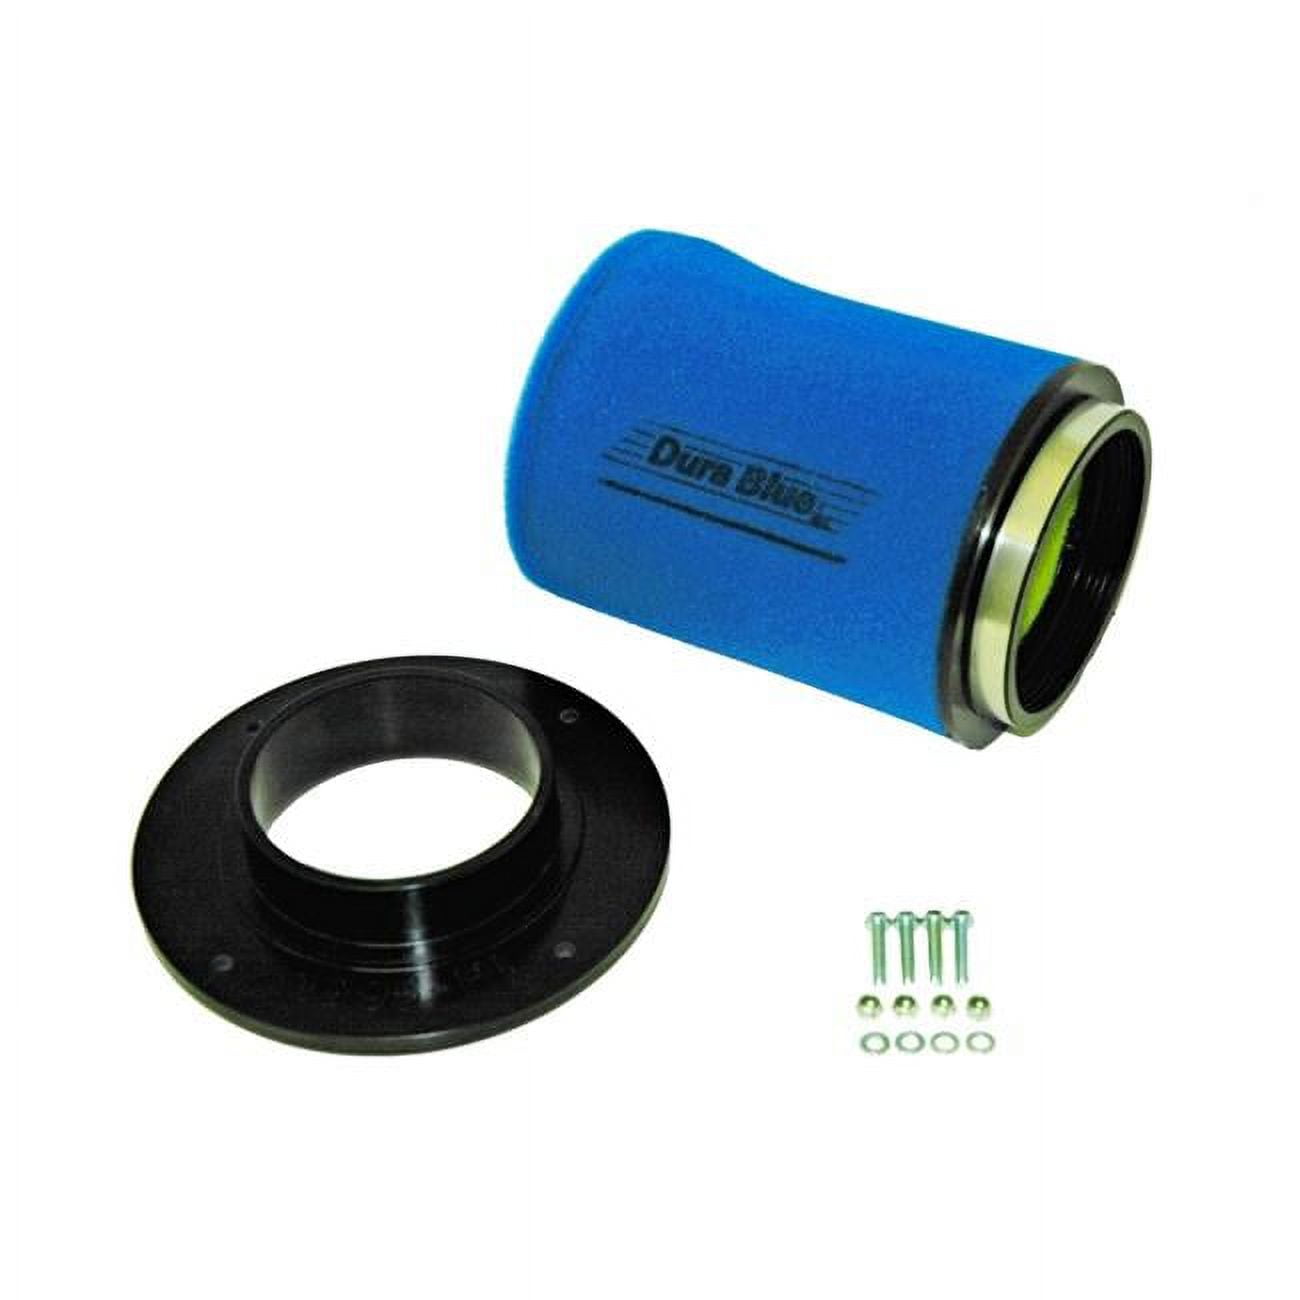 Picture of Durablue 1995k Air Filter - Power Yamaha YFZ450 2004-2009 & 12-15 Kit - Clamp-on Filter & Mounting Plate